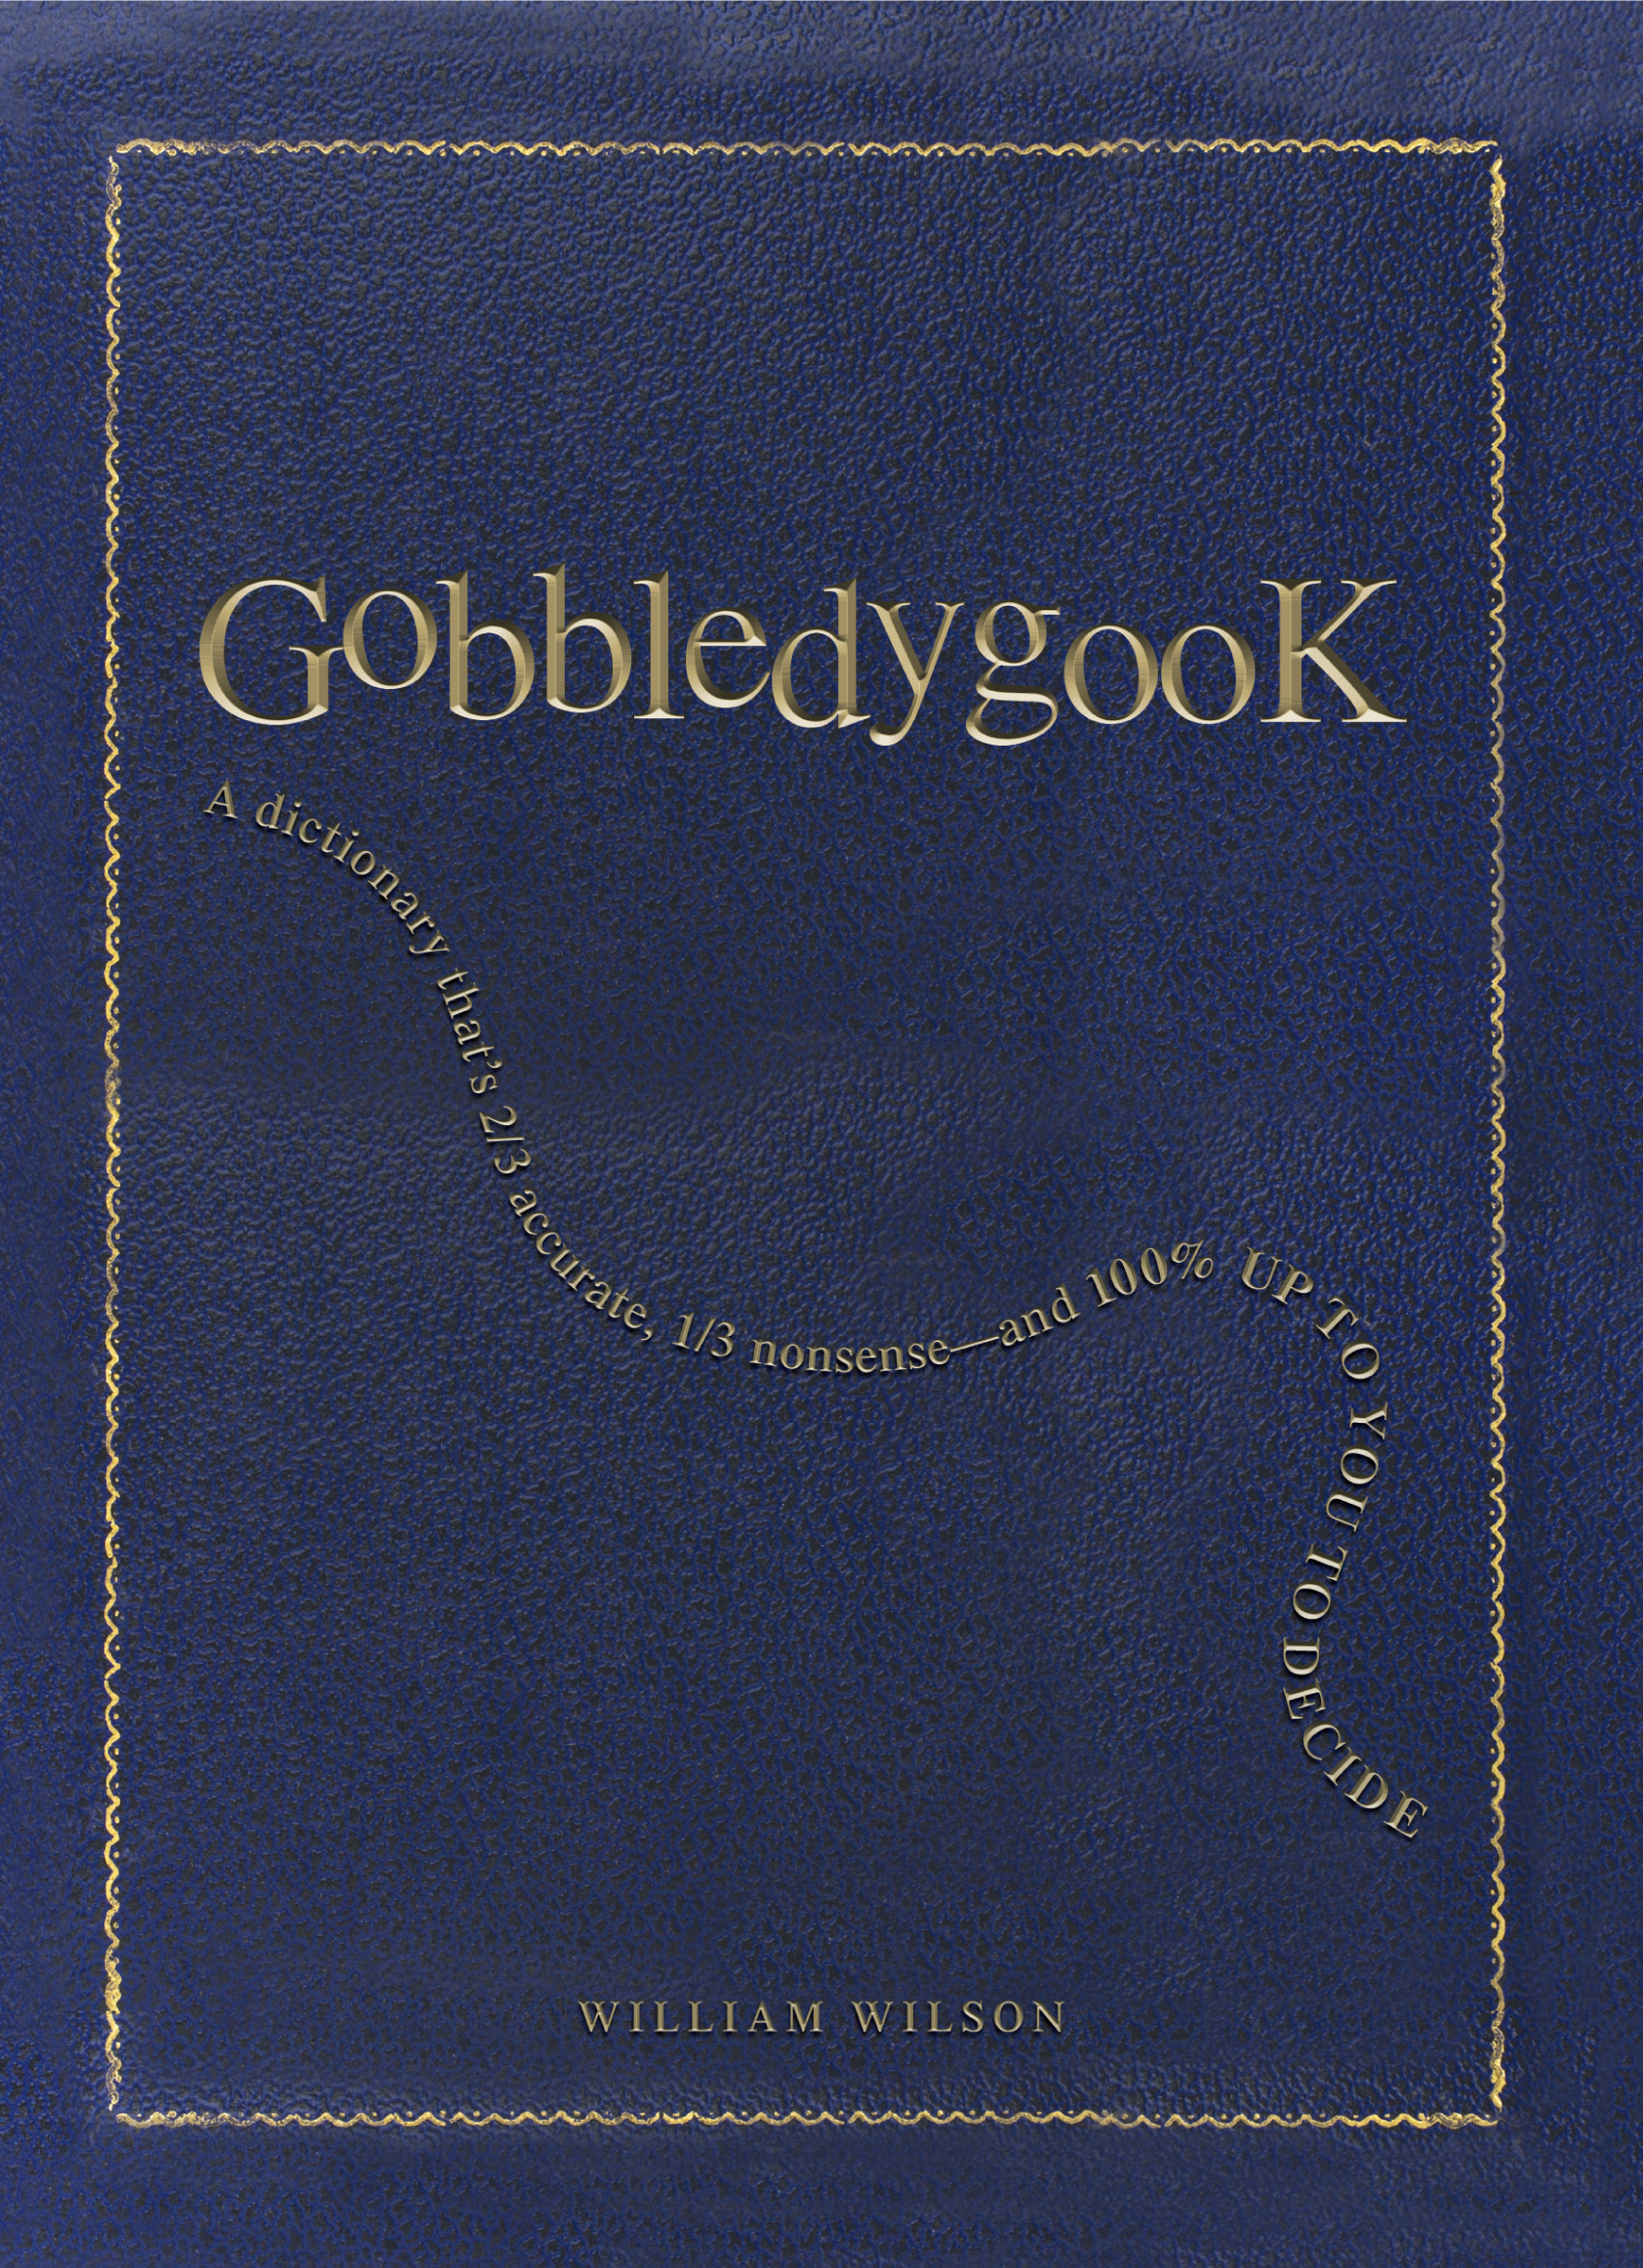 Gobbledygook A Dictionary Thats 13 Accurate 23 Nonsense - and 100 Up to You to Decide - image 1